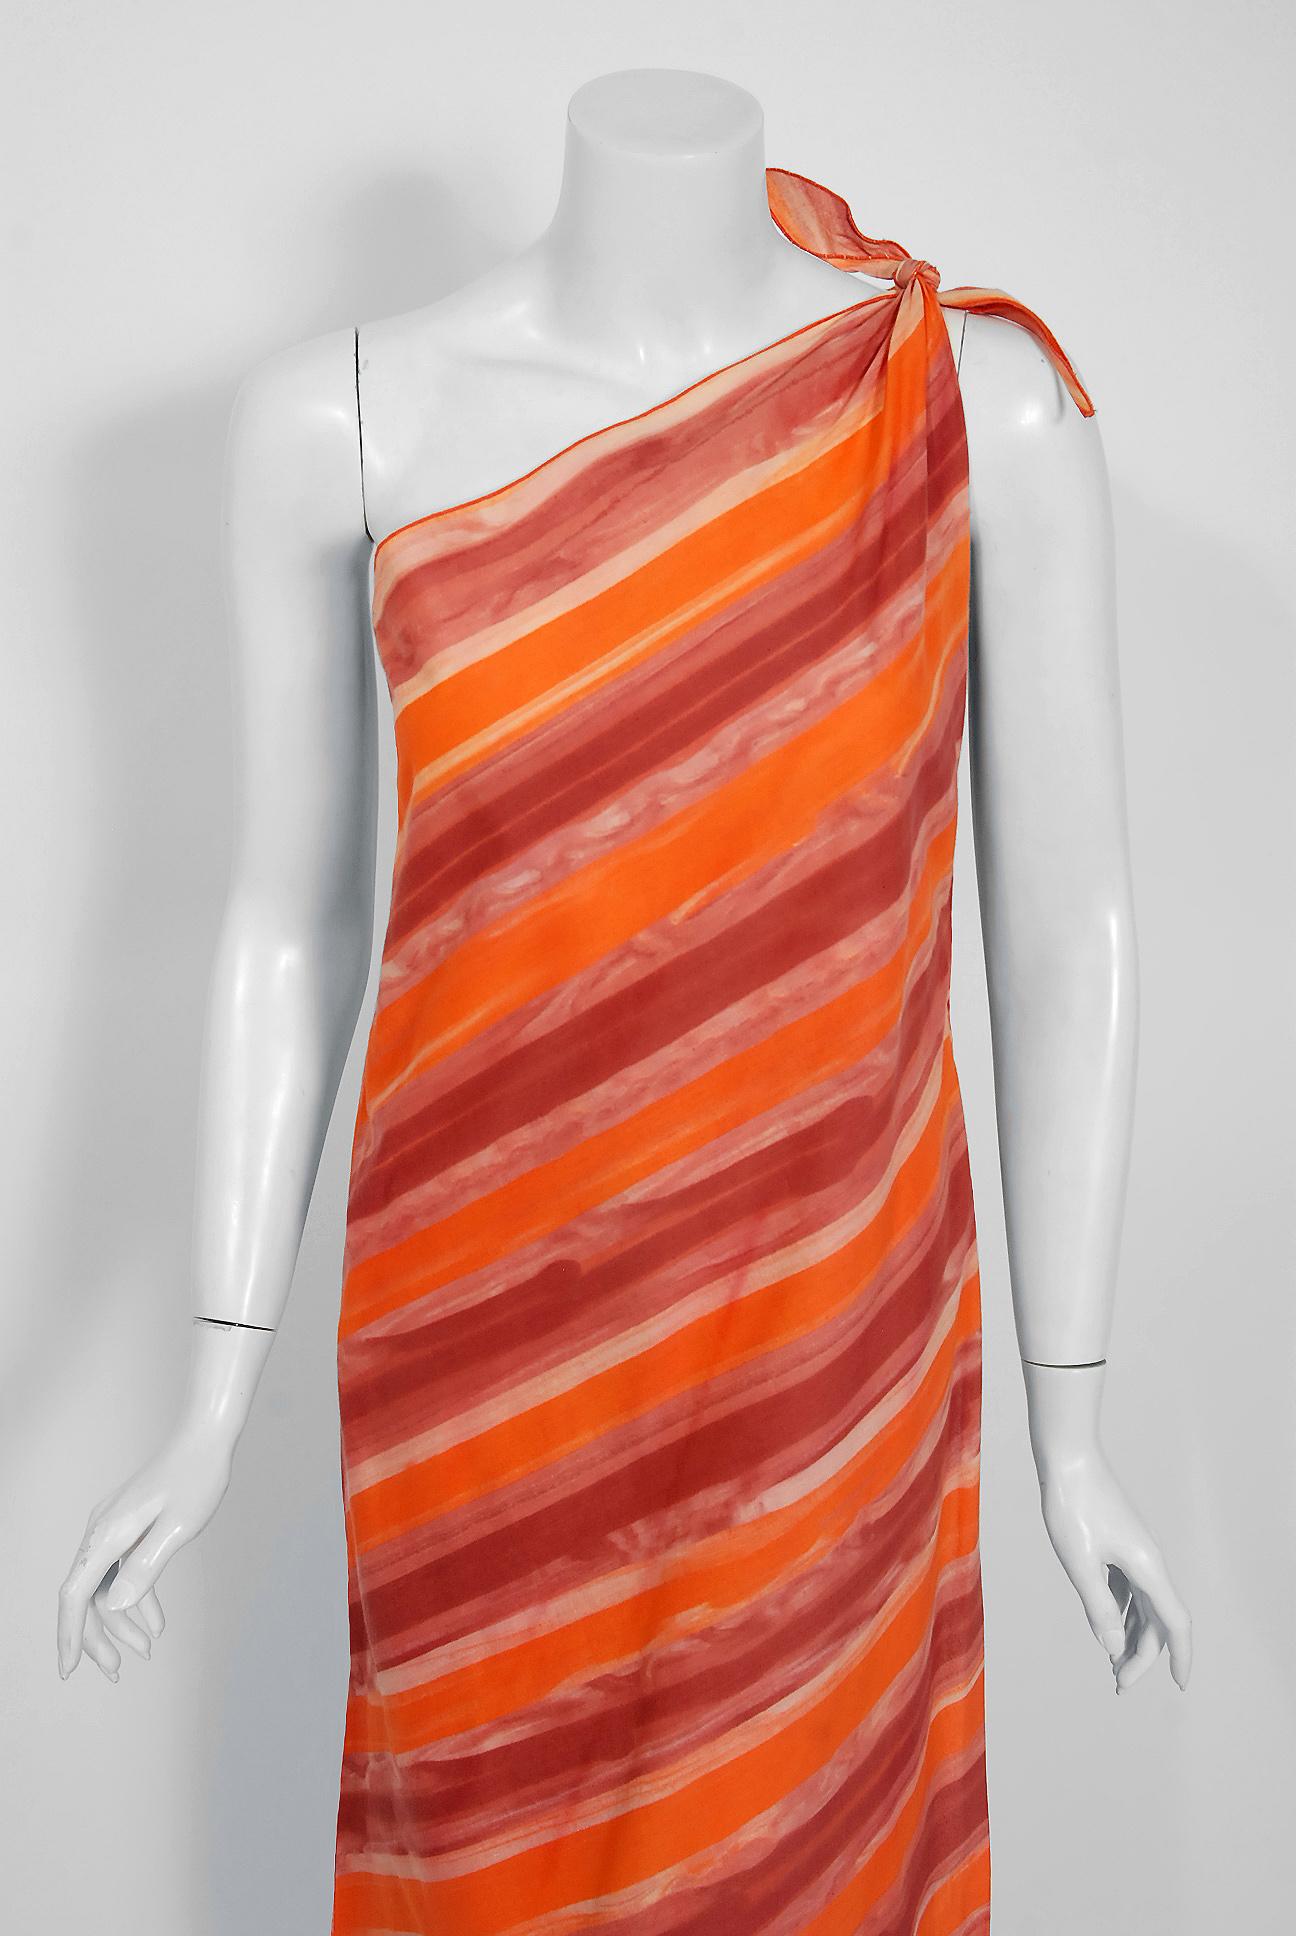 Stunning Paco Rabanne designer orange ombré cotton ensemble dating back to the mid 1970's. Paco Rabanne's architectural background led him to use interesting techniques when he created his garments. These fashion experiments were important in